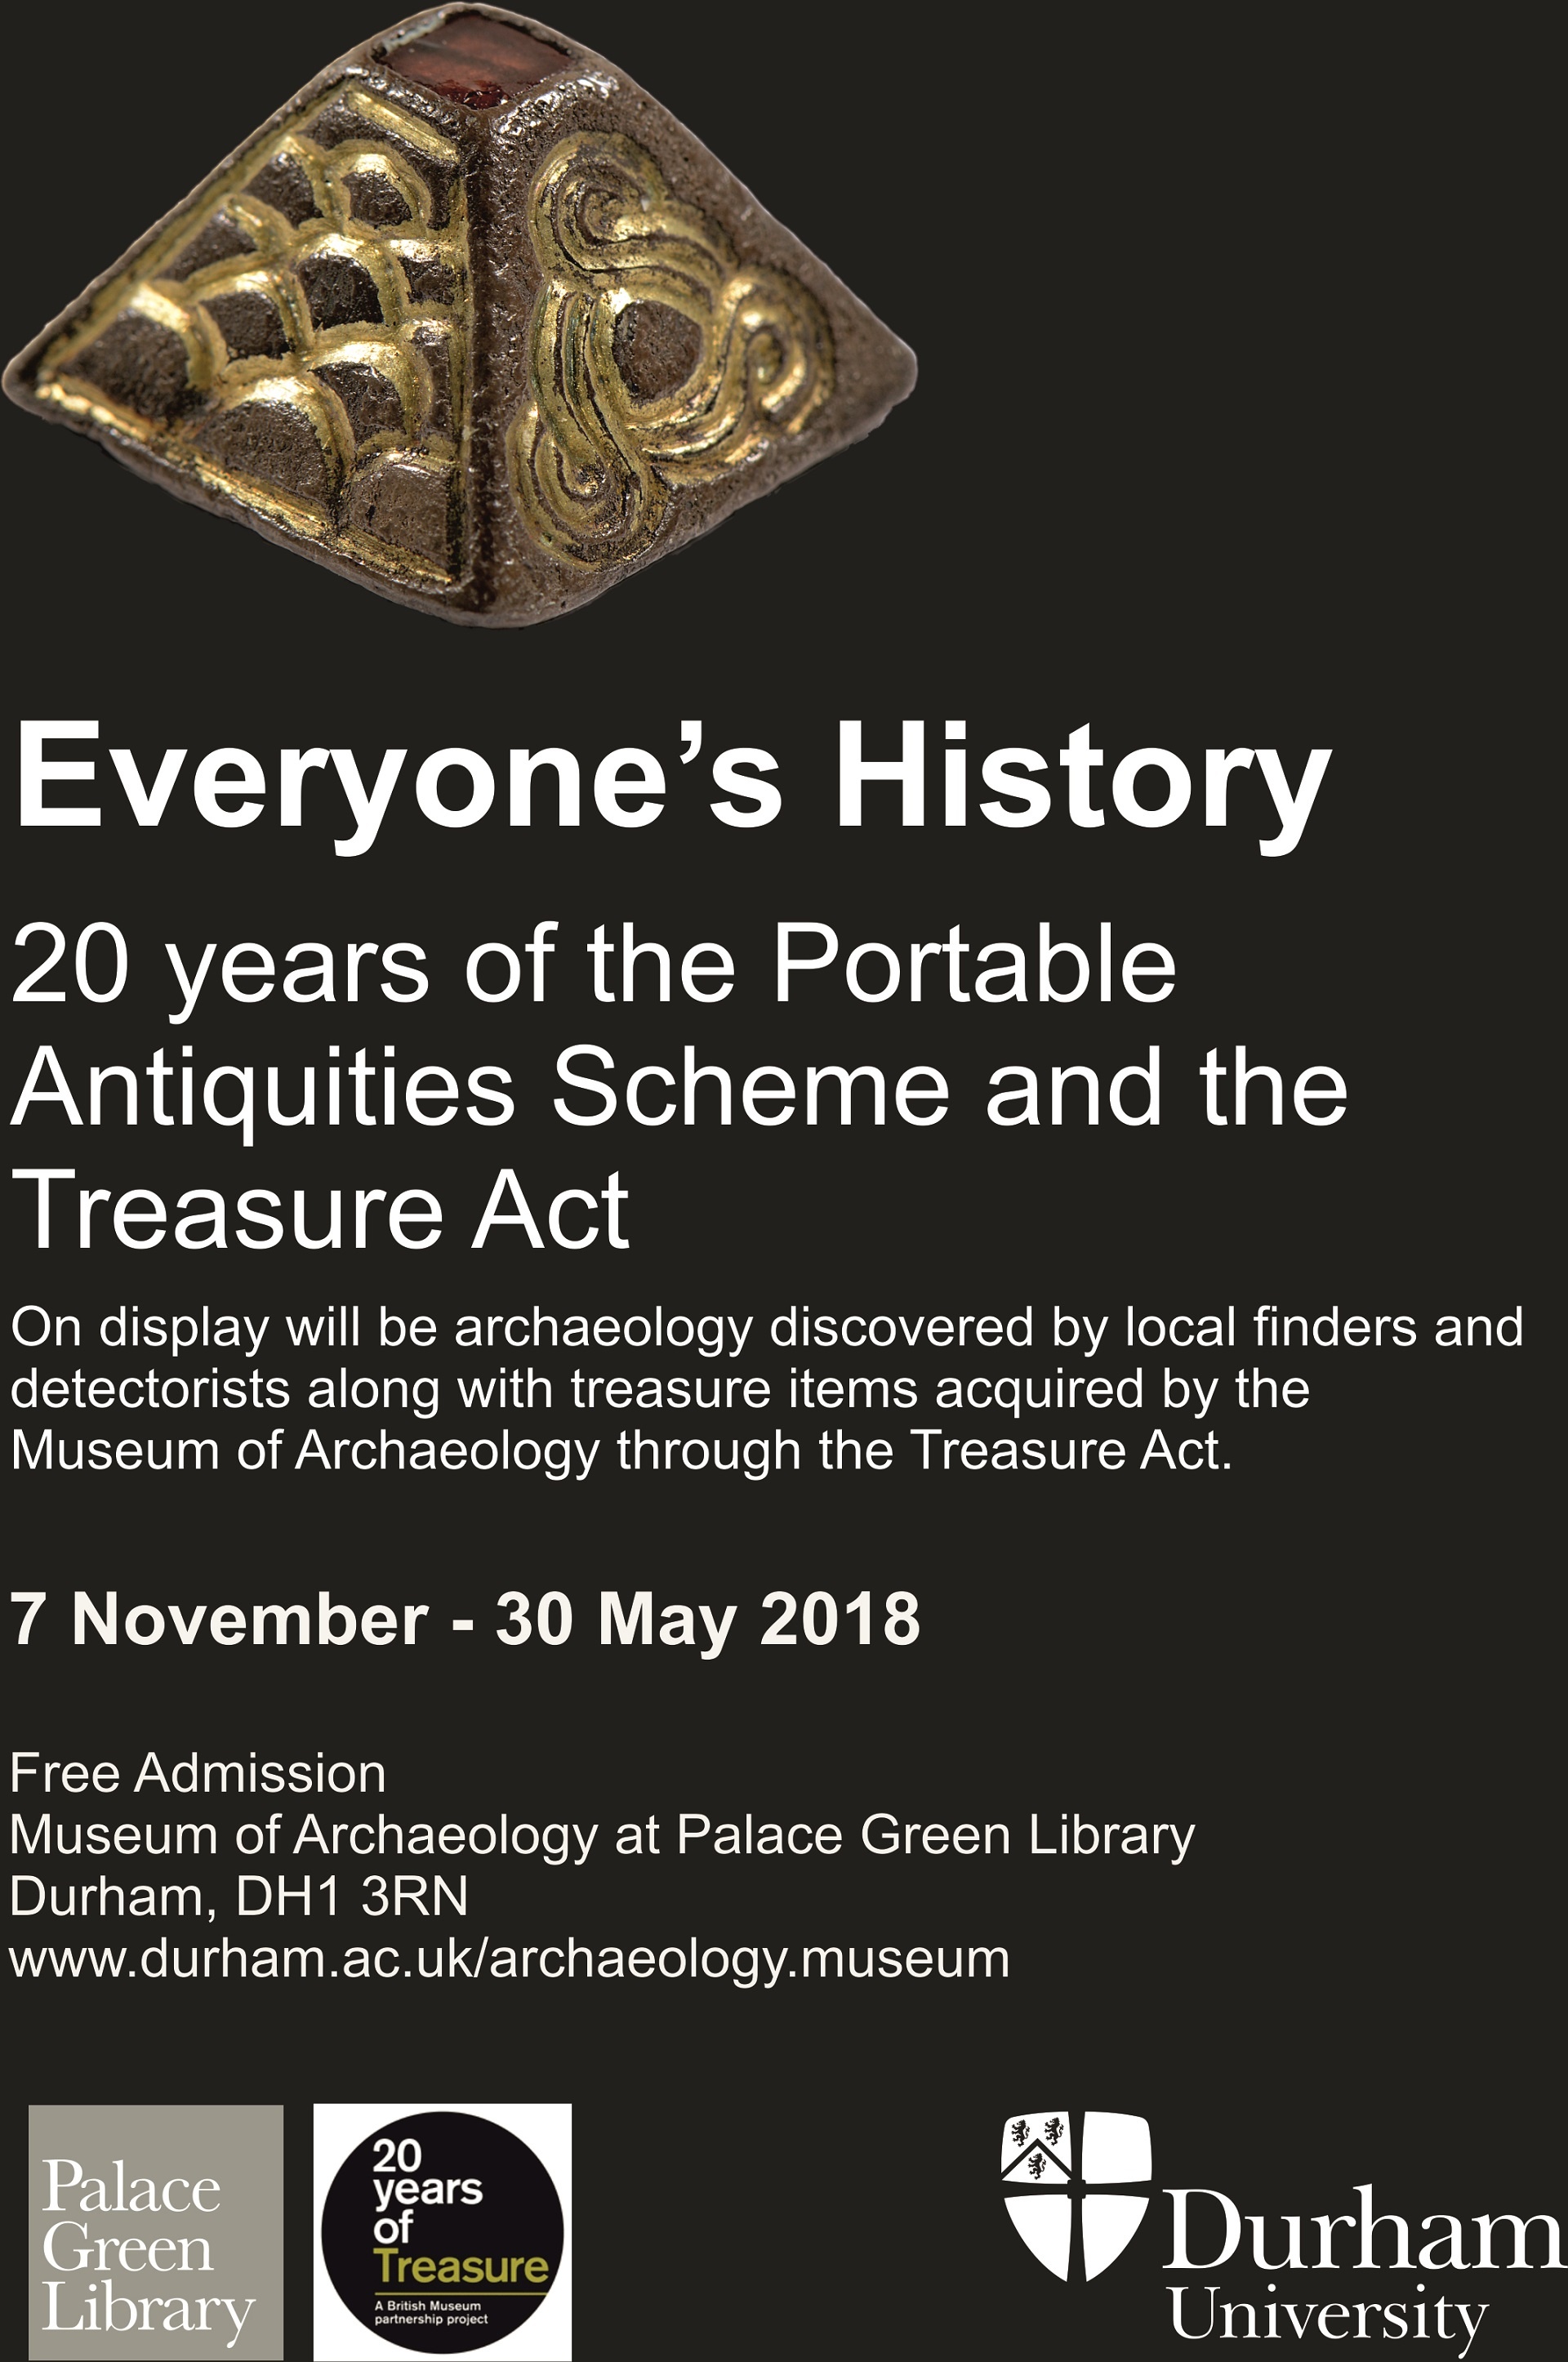 Poster for the Everyone’s History Exhibition